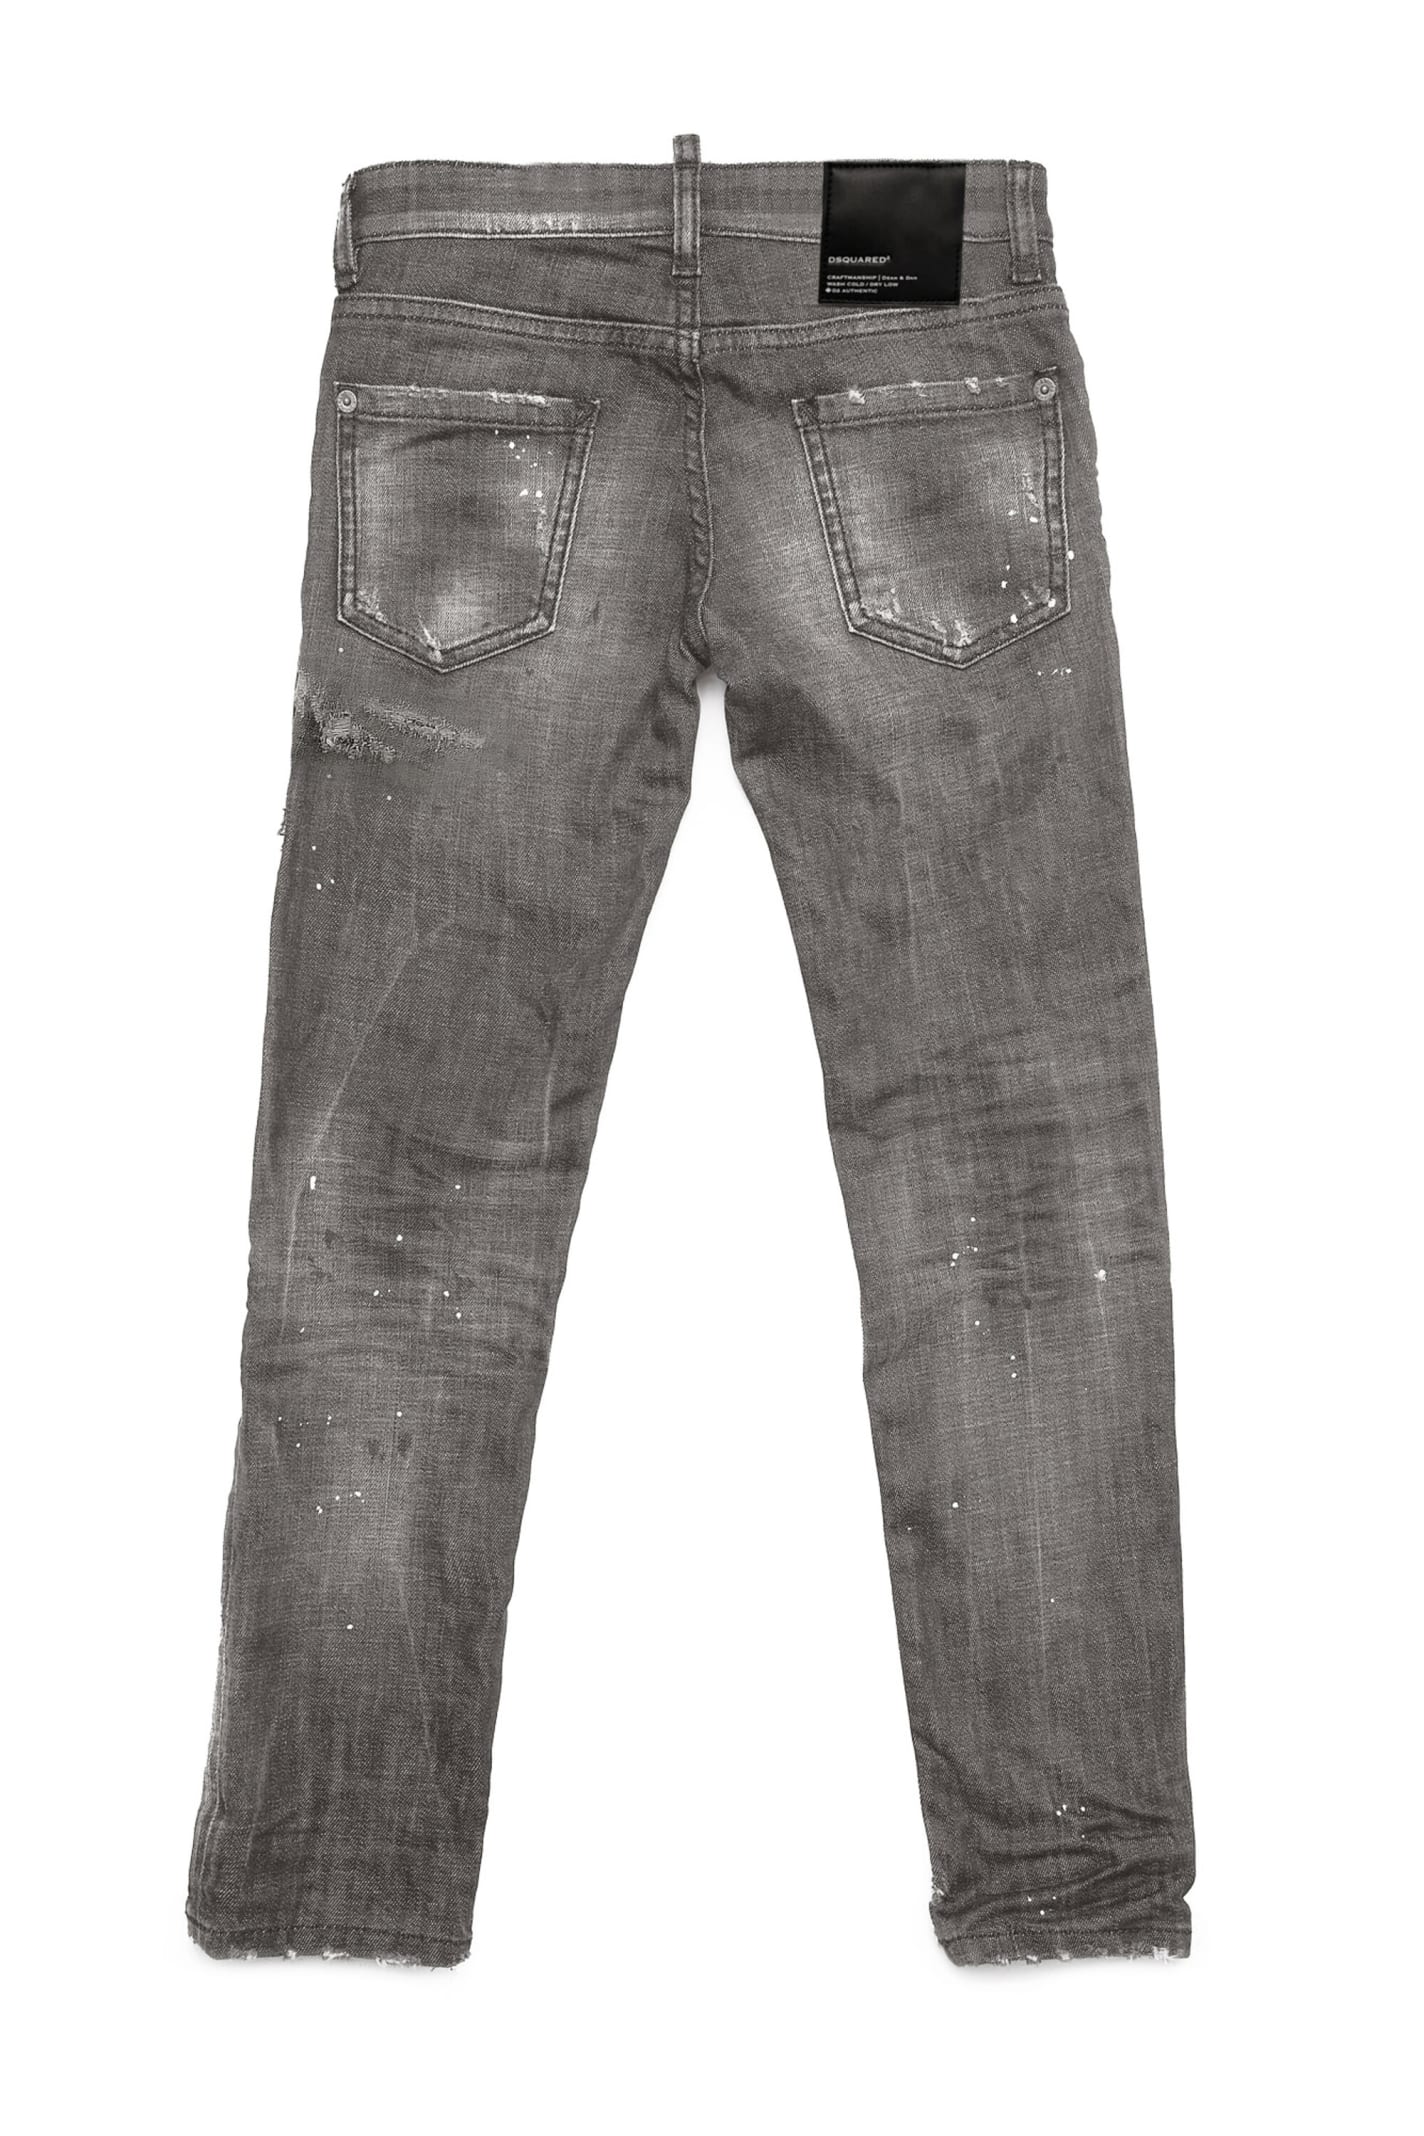 Shop Dsquared2 D2p529m Slim Jean Trousers Dsquared Slim Straight Gray Jeans Shaded With Abrasions And Stains In Denim Black